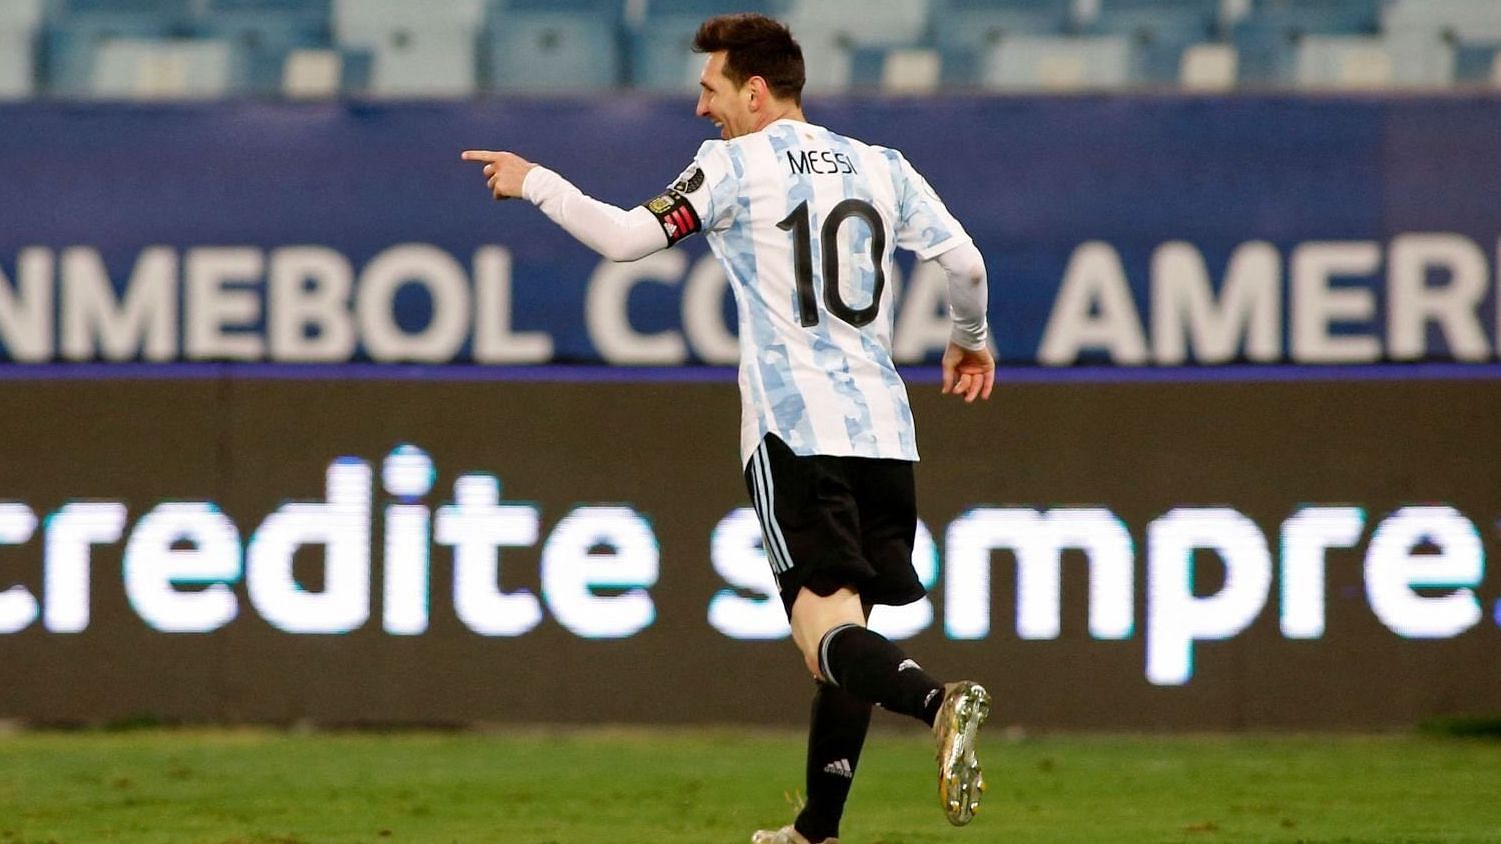 Lionel Messi played his 148th game for Argentina, setting yet another record.&nbsp;